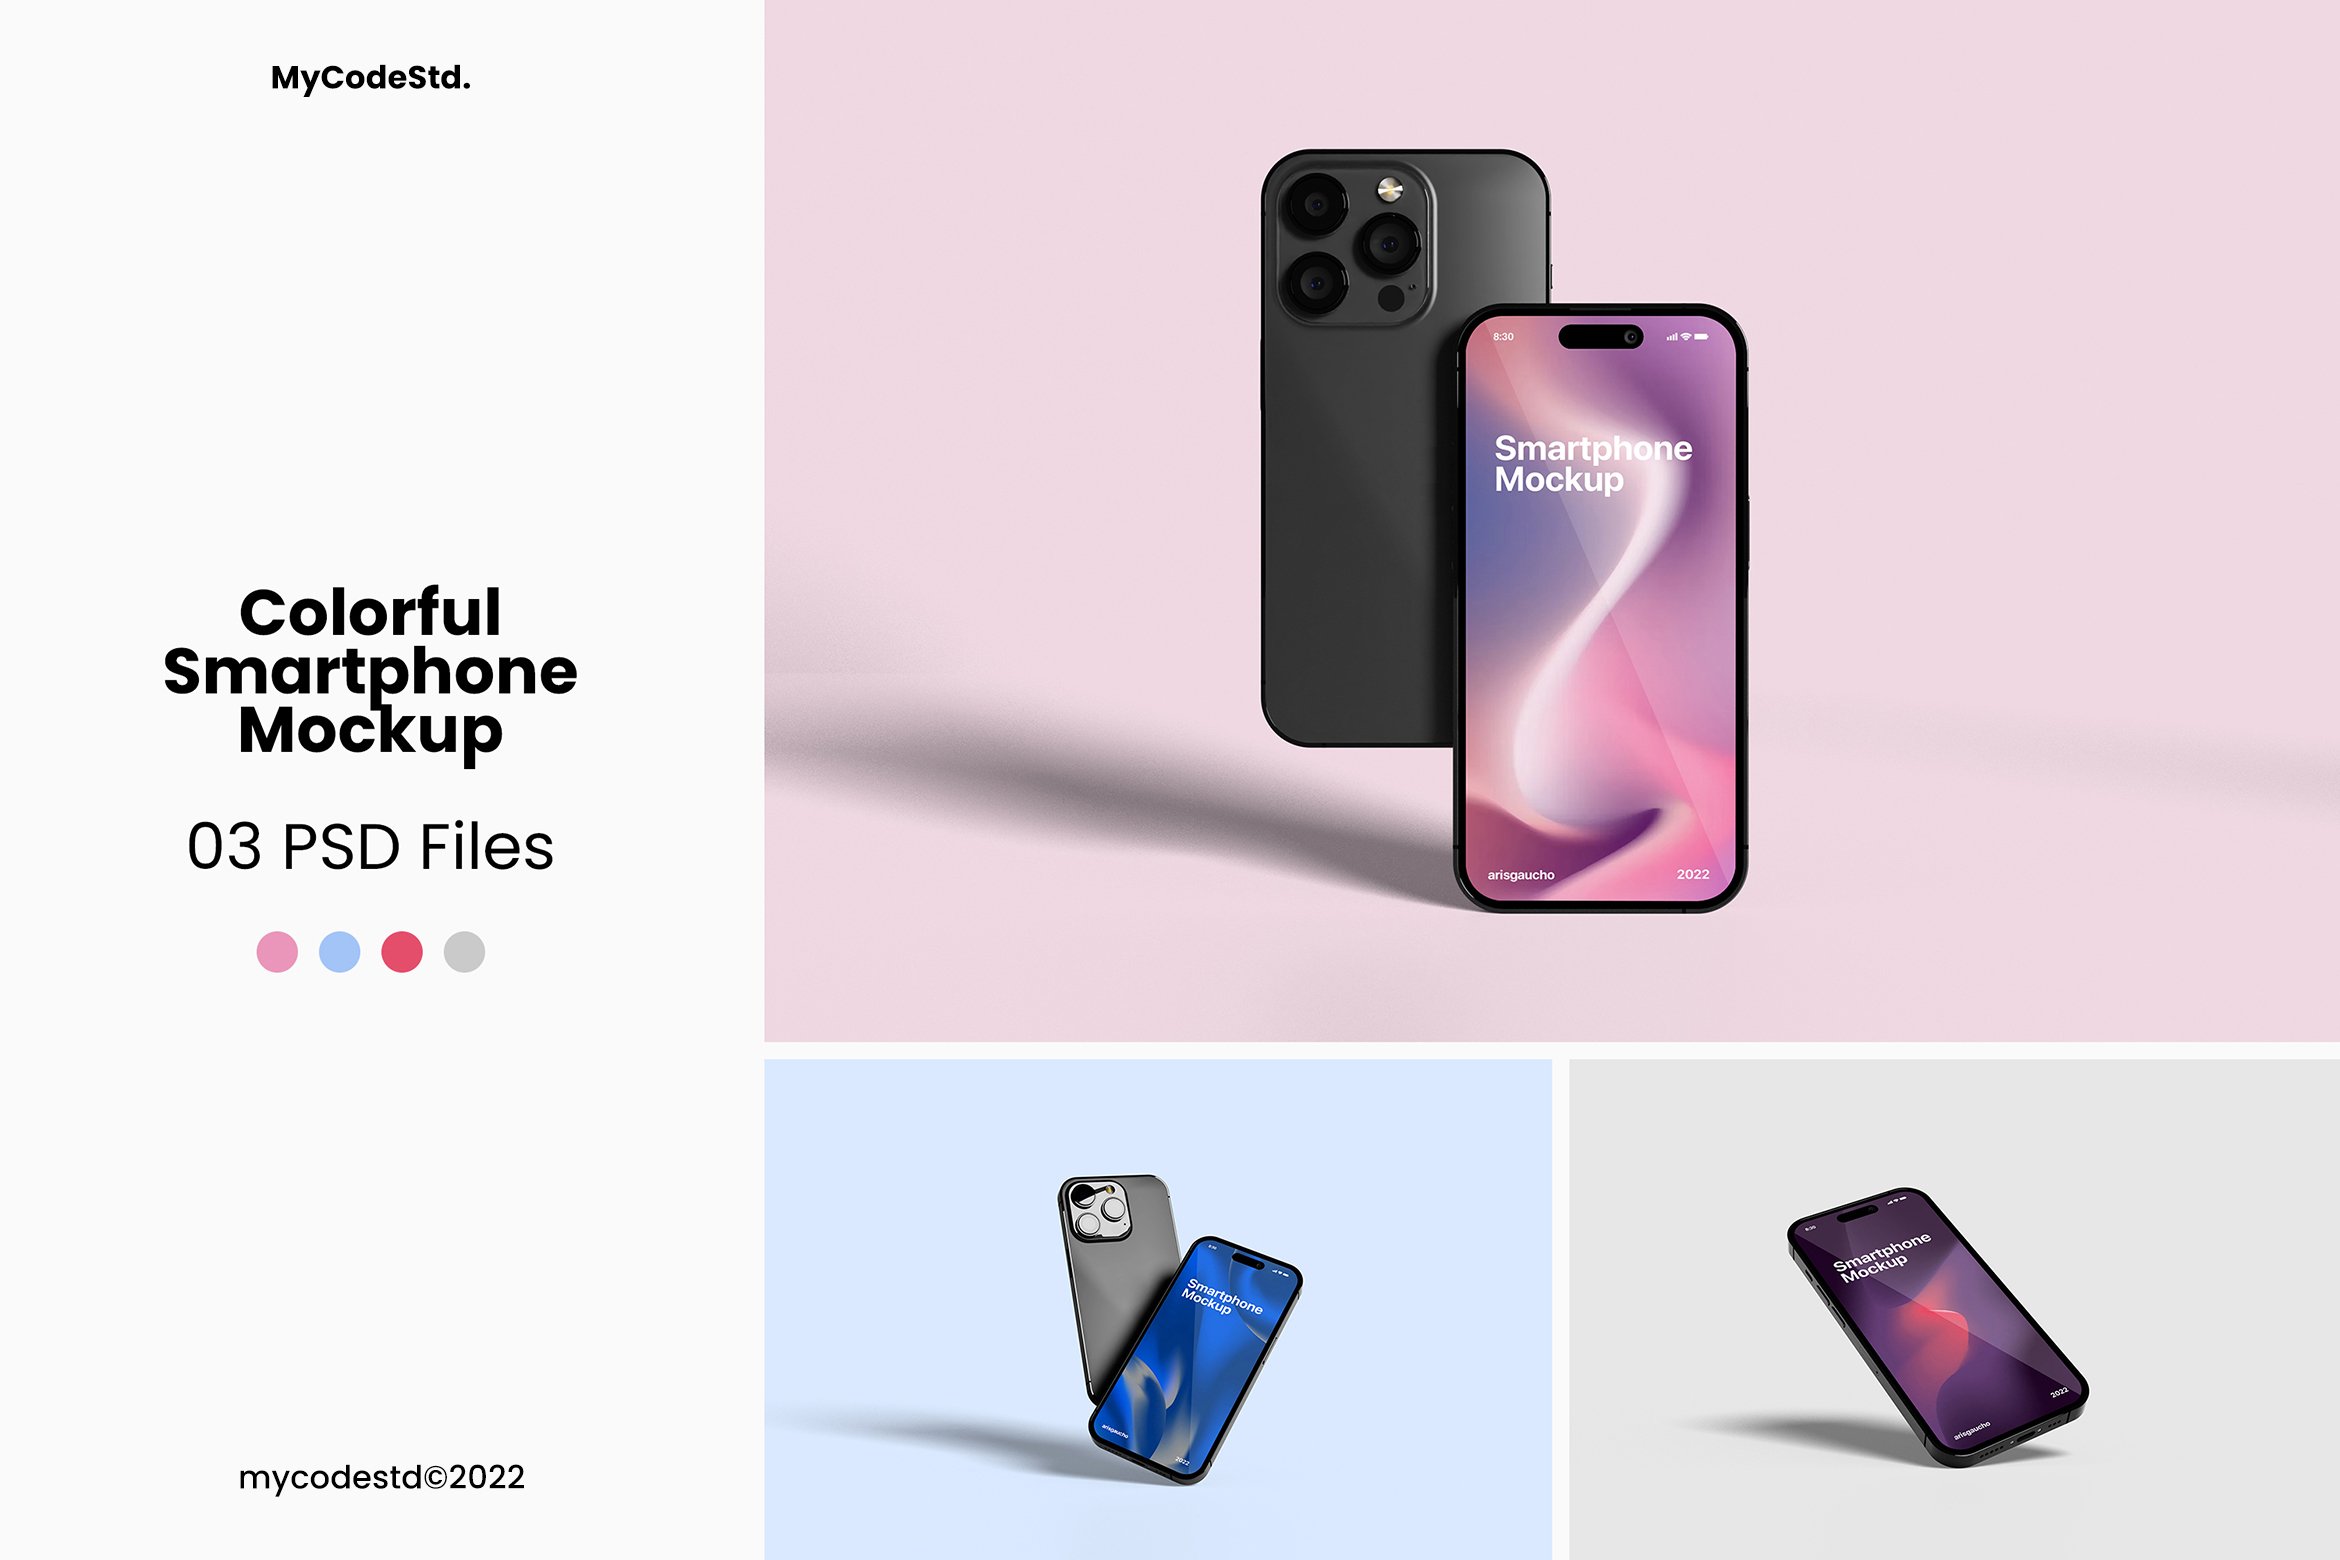 Colorful Smartphone Mockup cover image.